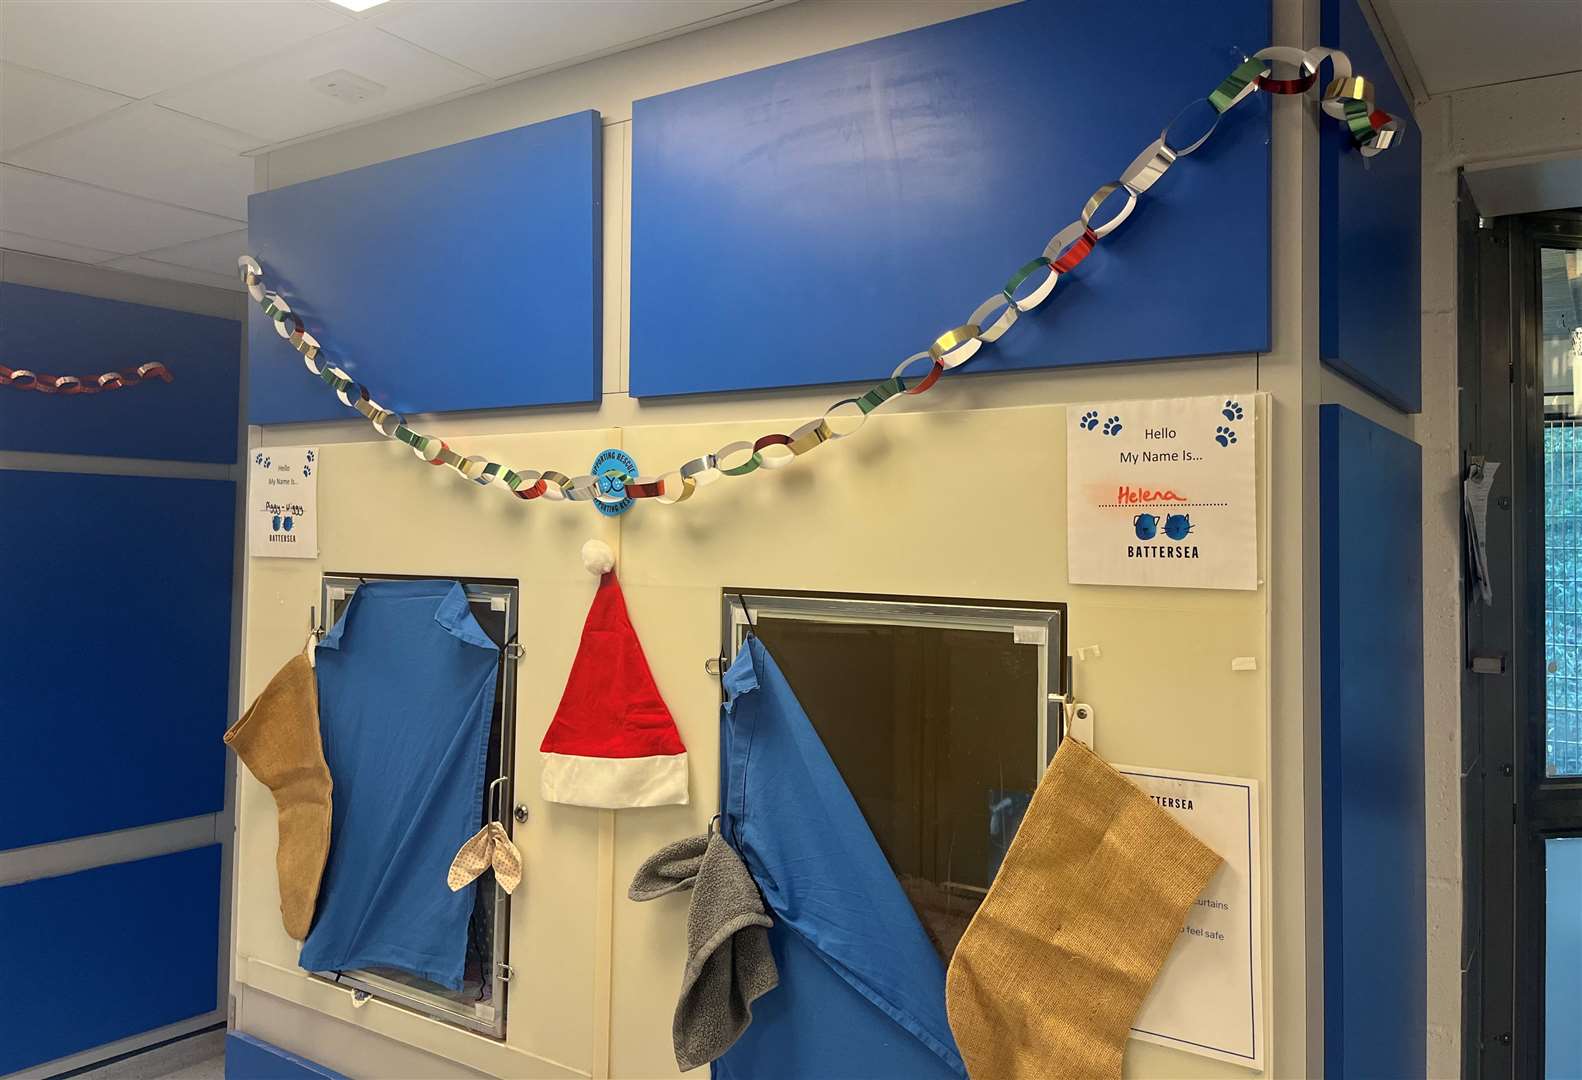 Staff and volunteers have decorated the cattery with paper chains and Santa hats